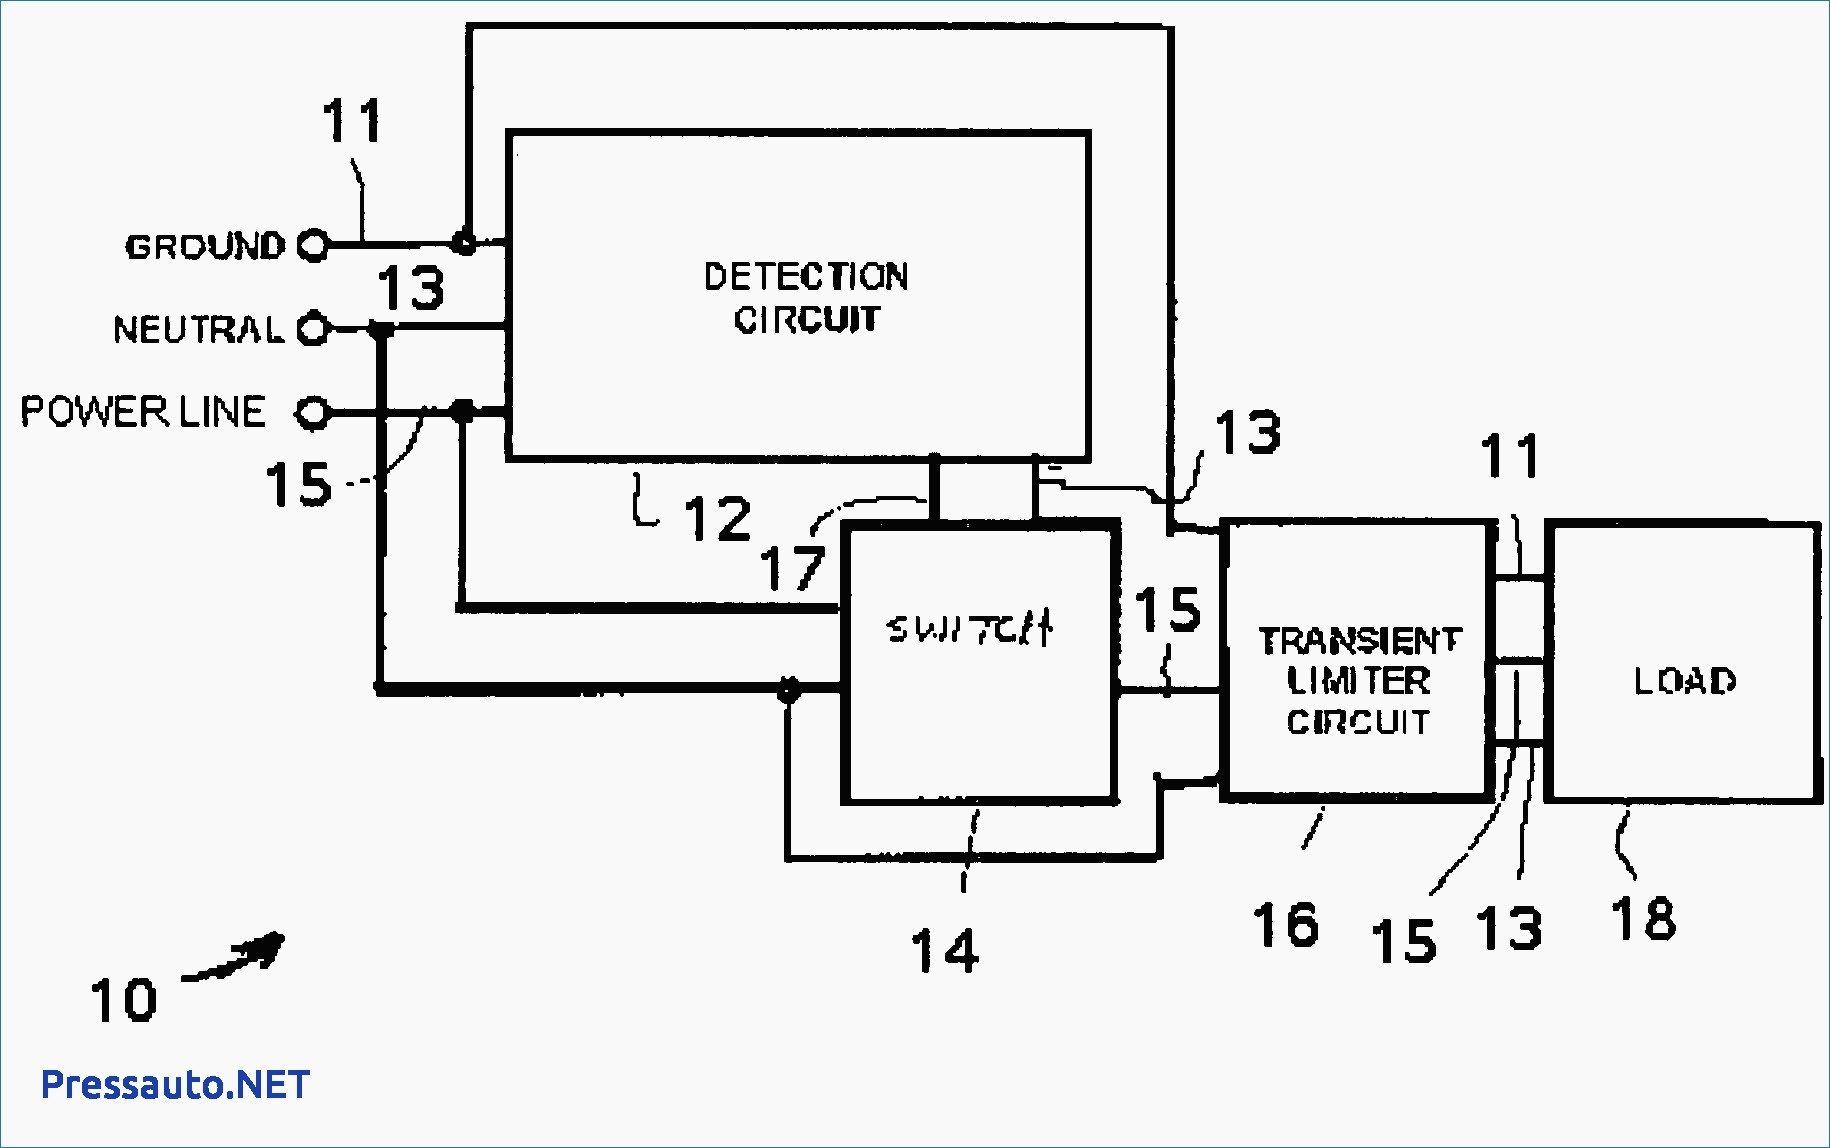 Gfci Outlet Wiring Diagram Awesome Great Gfci Wiring Diagram Inspiration Electrical